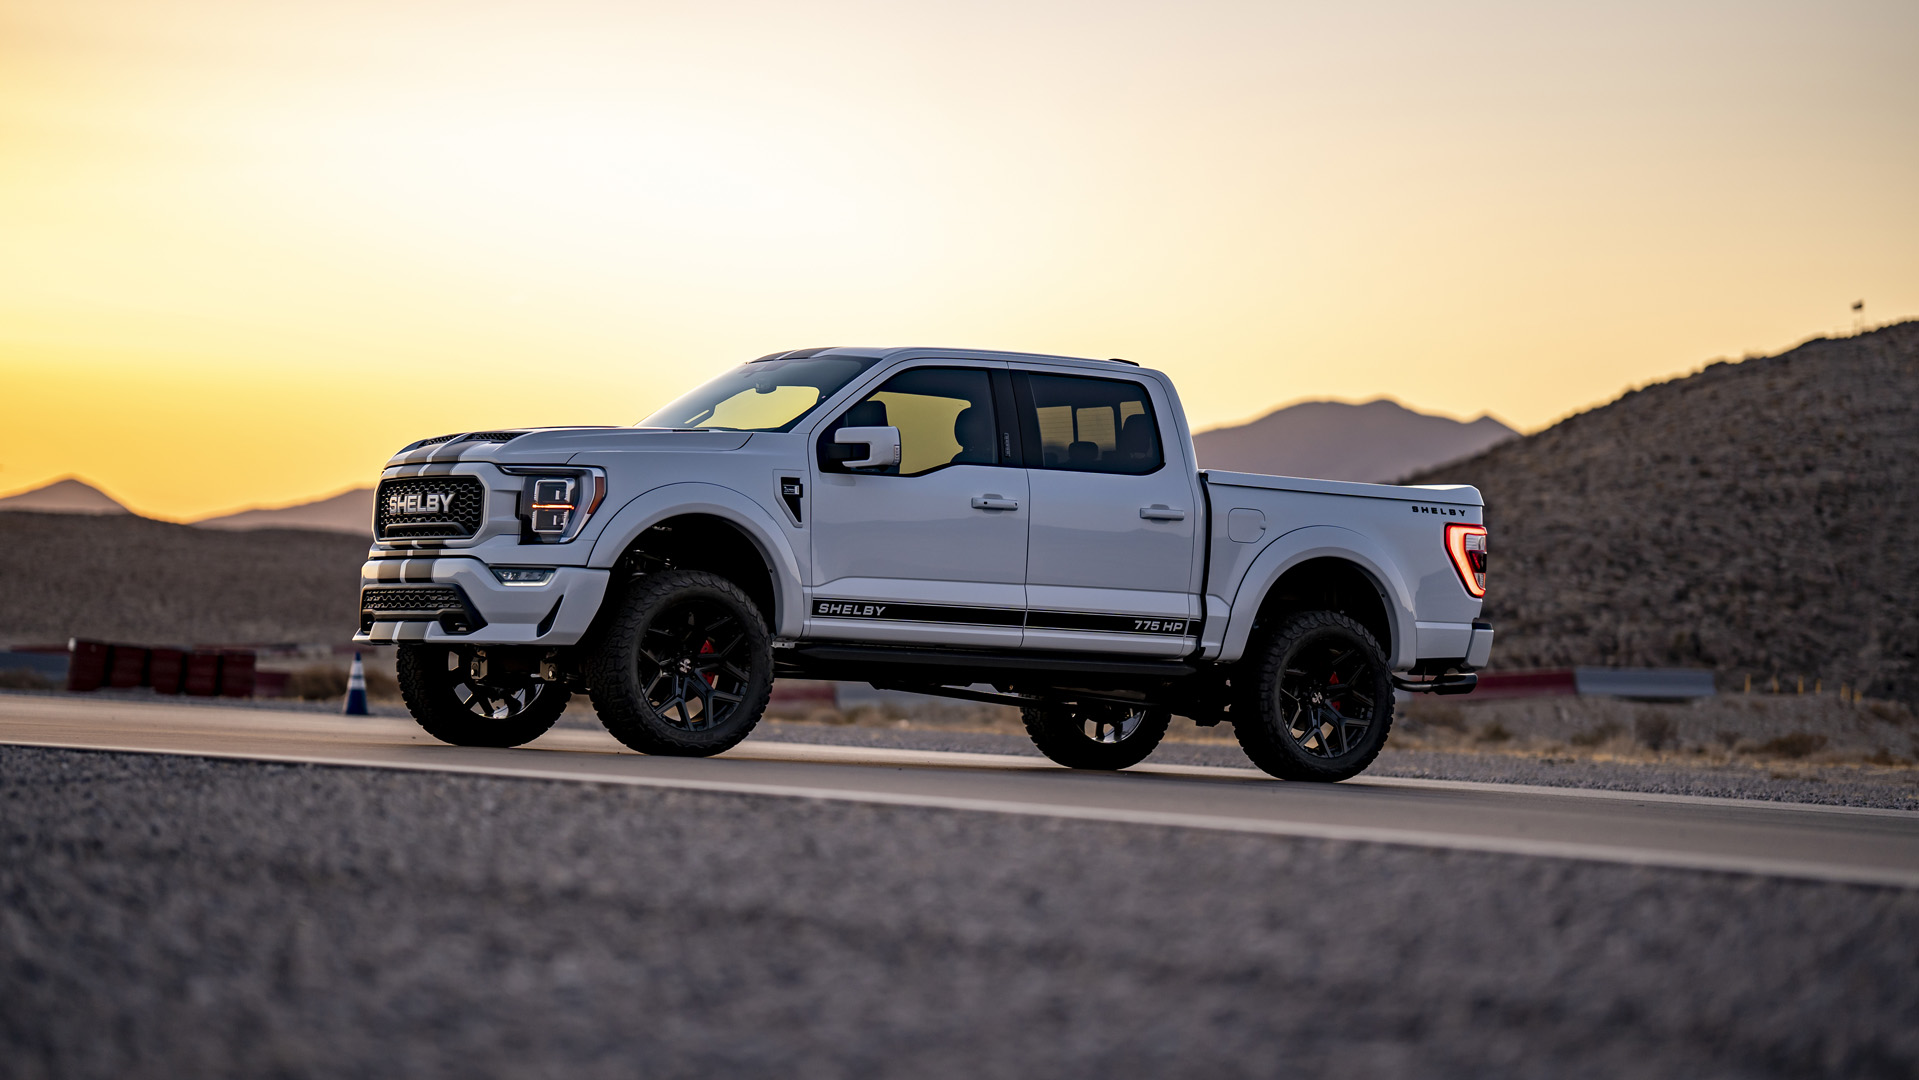 The 2023 Ford F-150 Shelby truck on the road at sunset